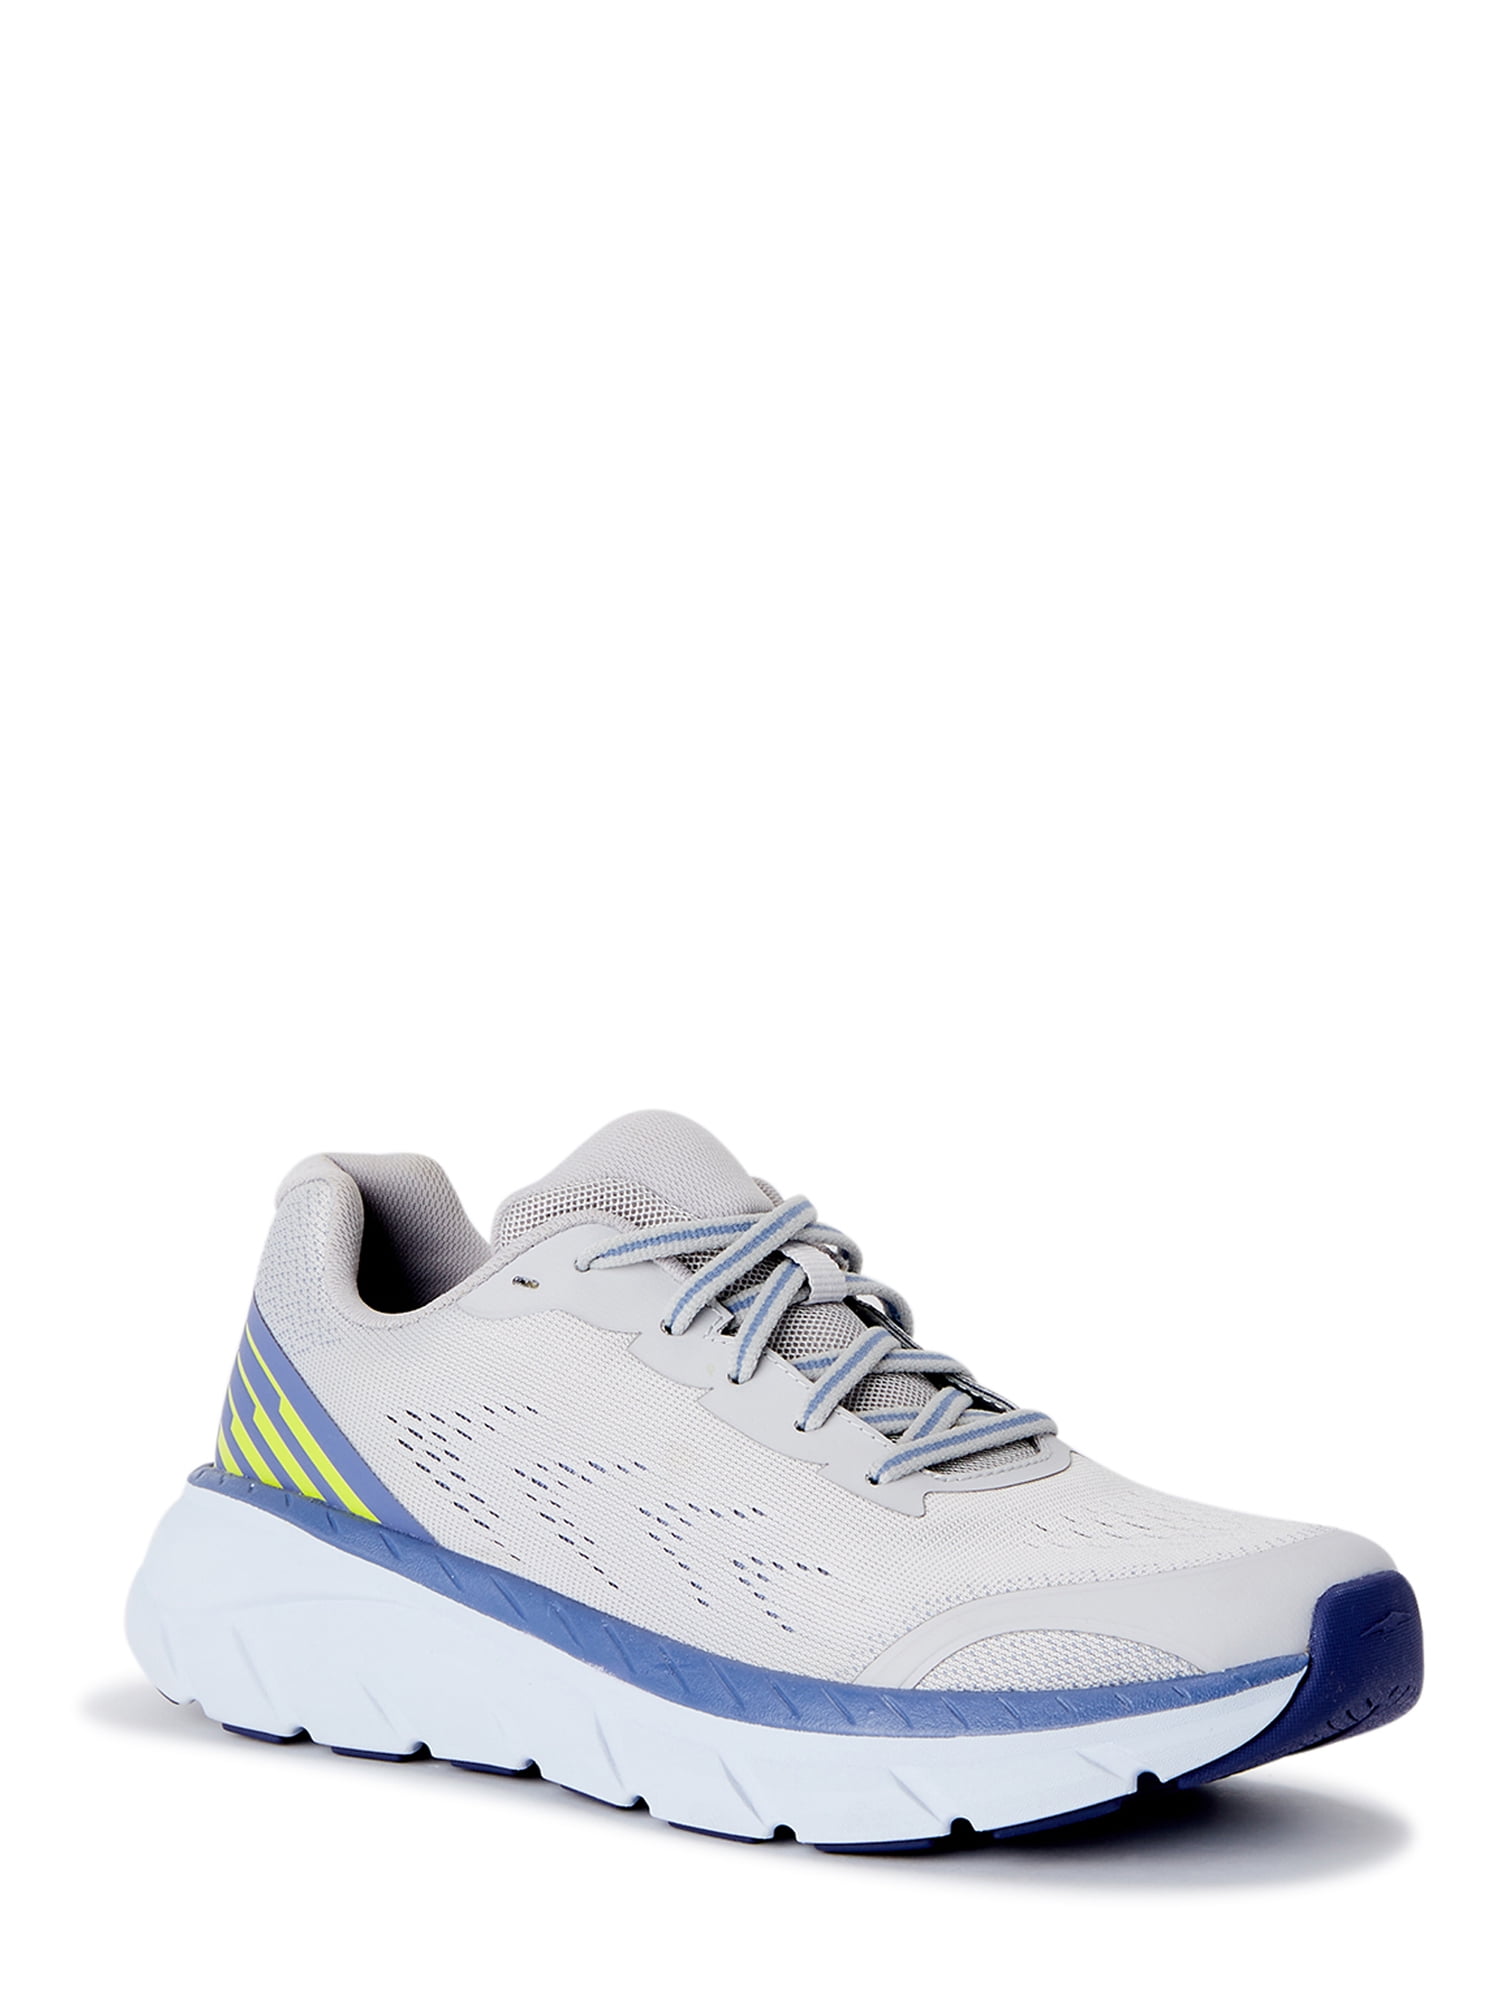 haizi Running Shoes Athletic Sneakers for Wowen and Men 